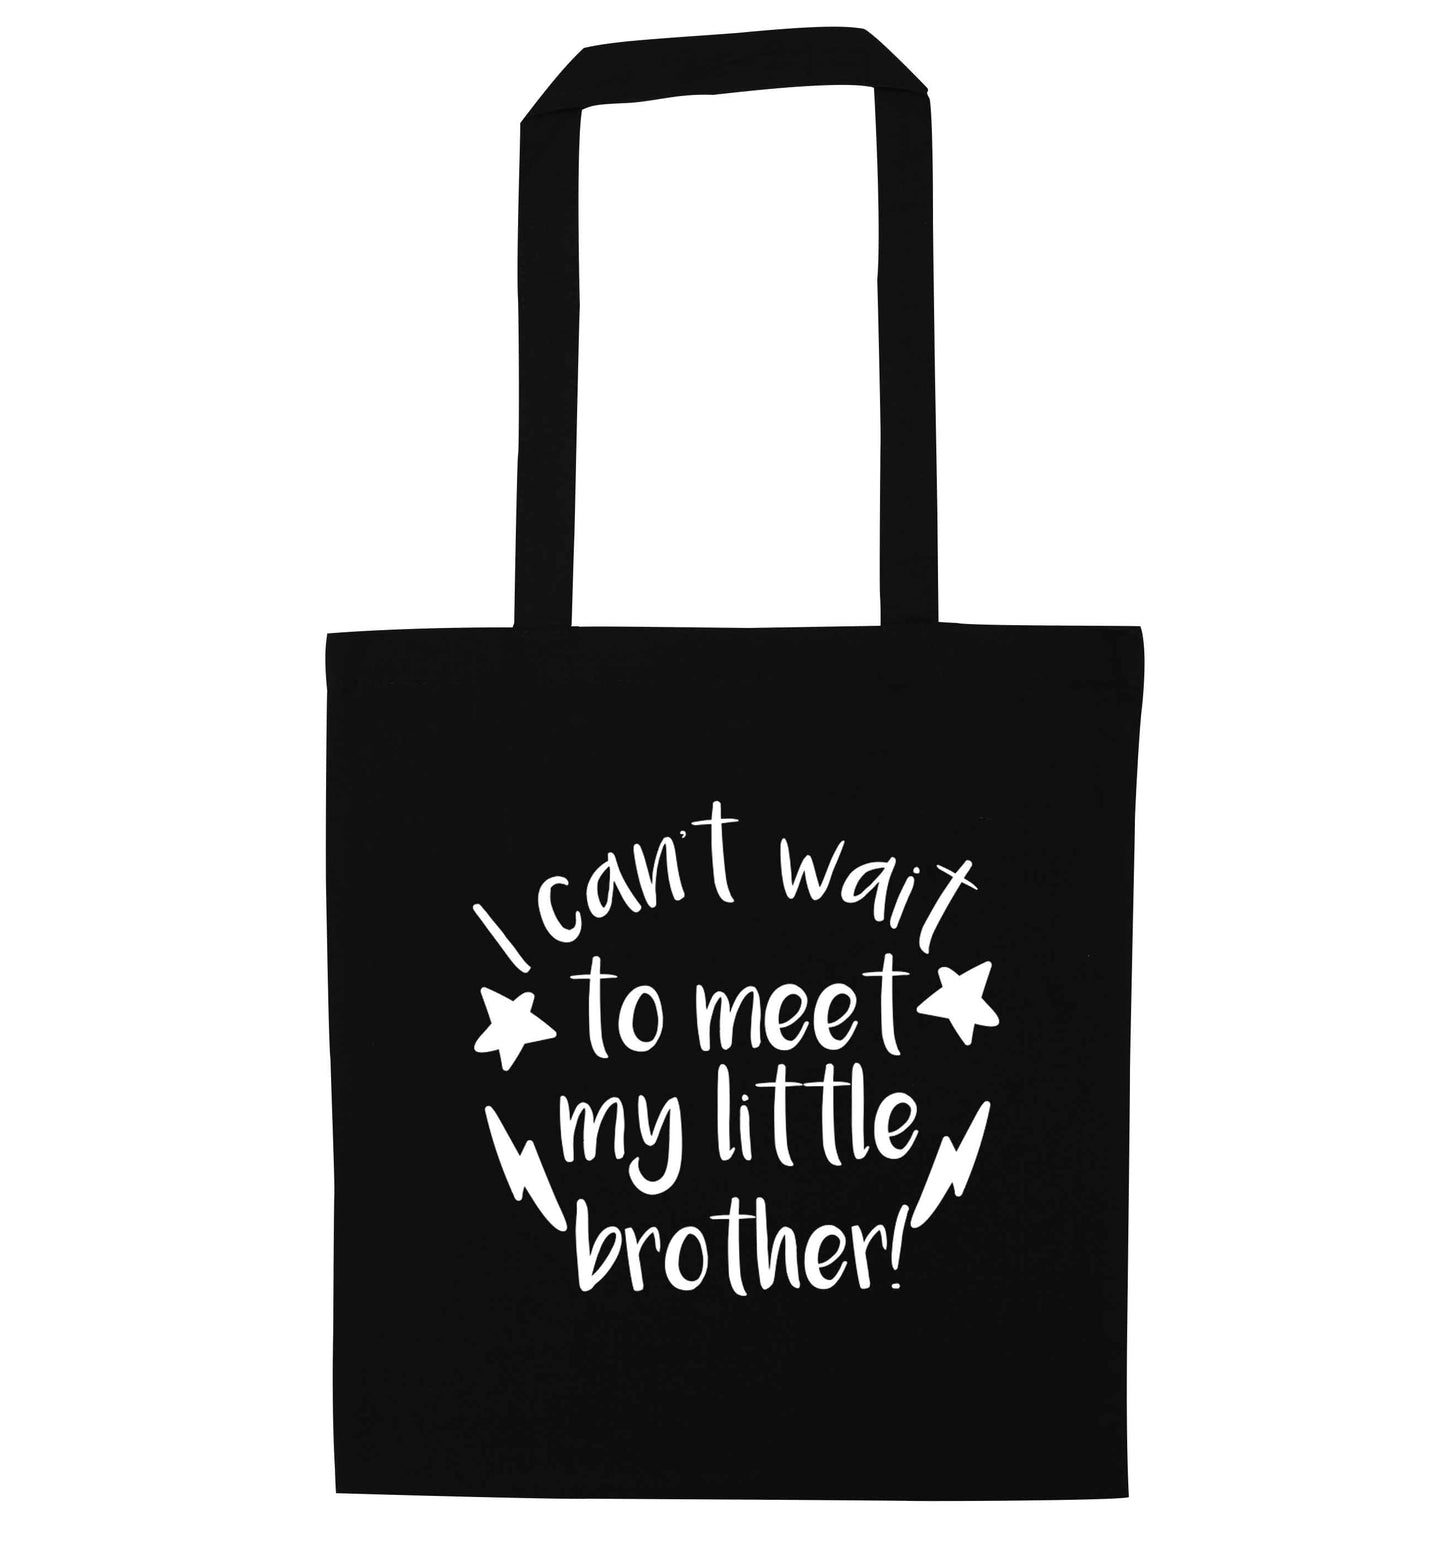 I can't wait to meet my sister! black tote bag